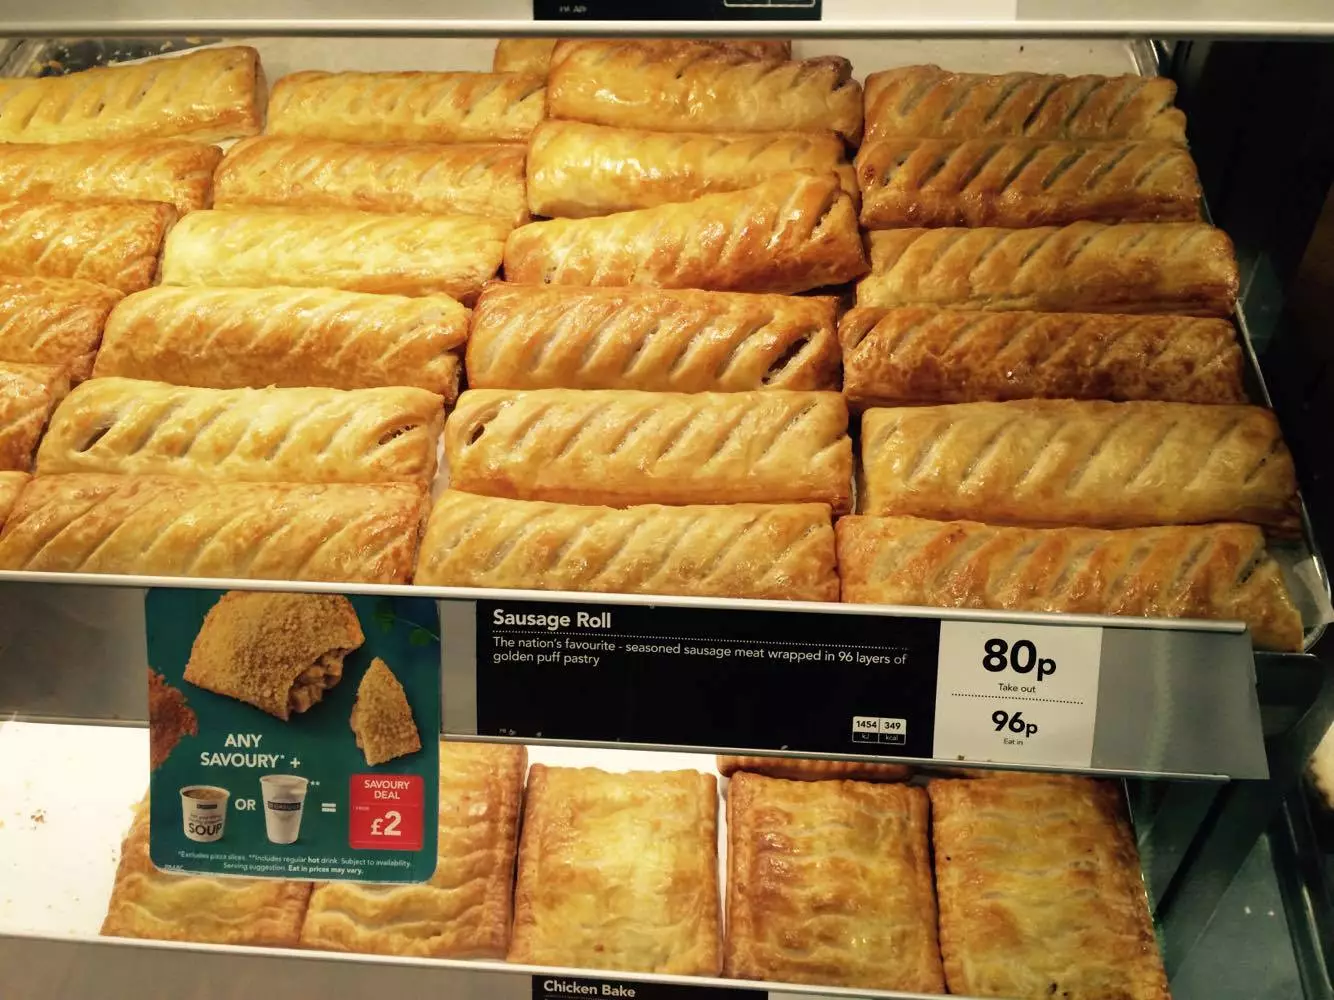 Not long till we can order that long-awaited sausage roll IRL (